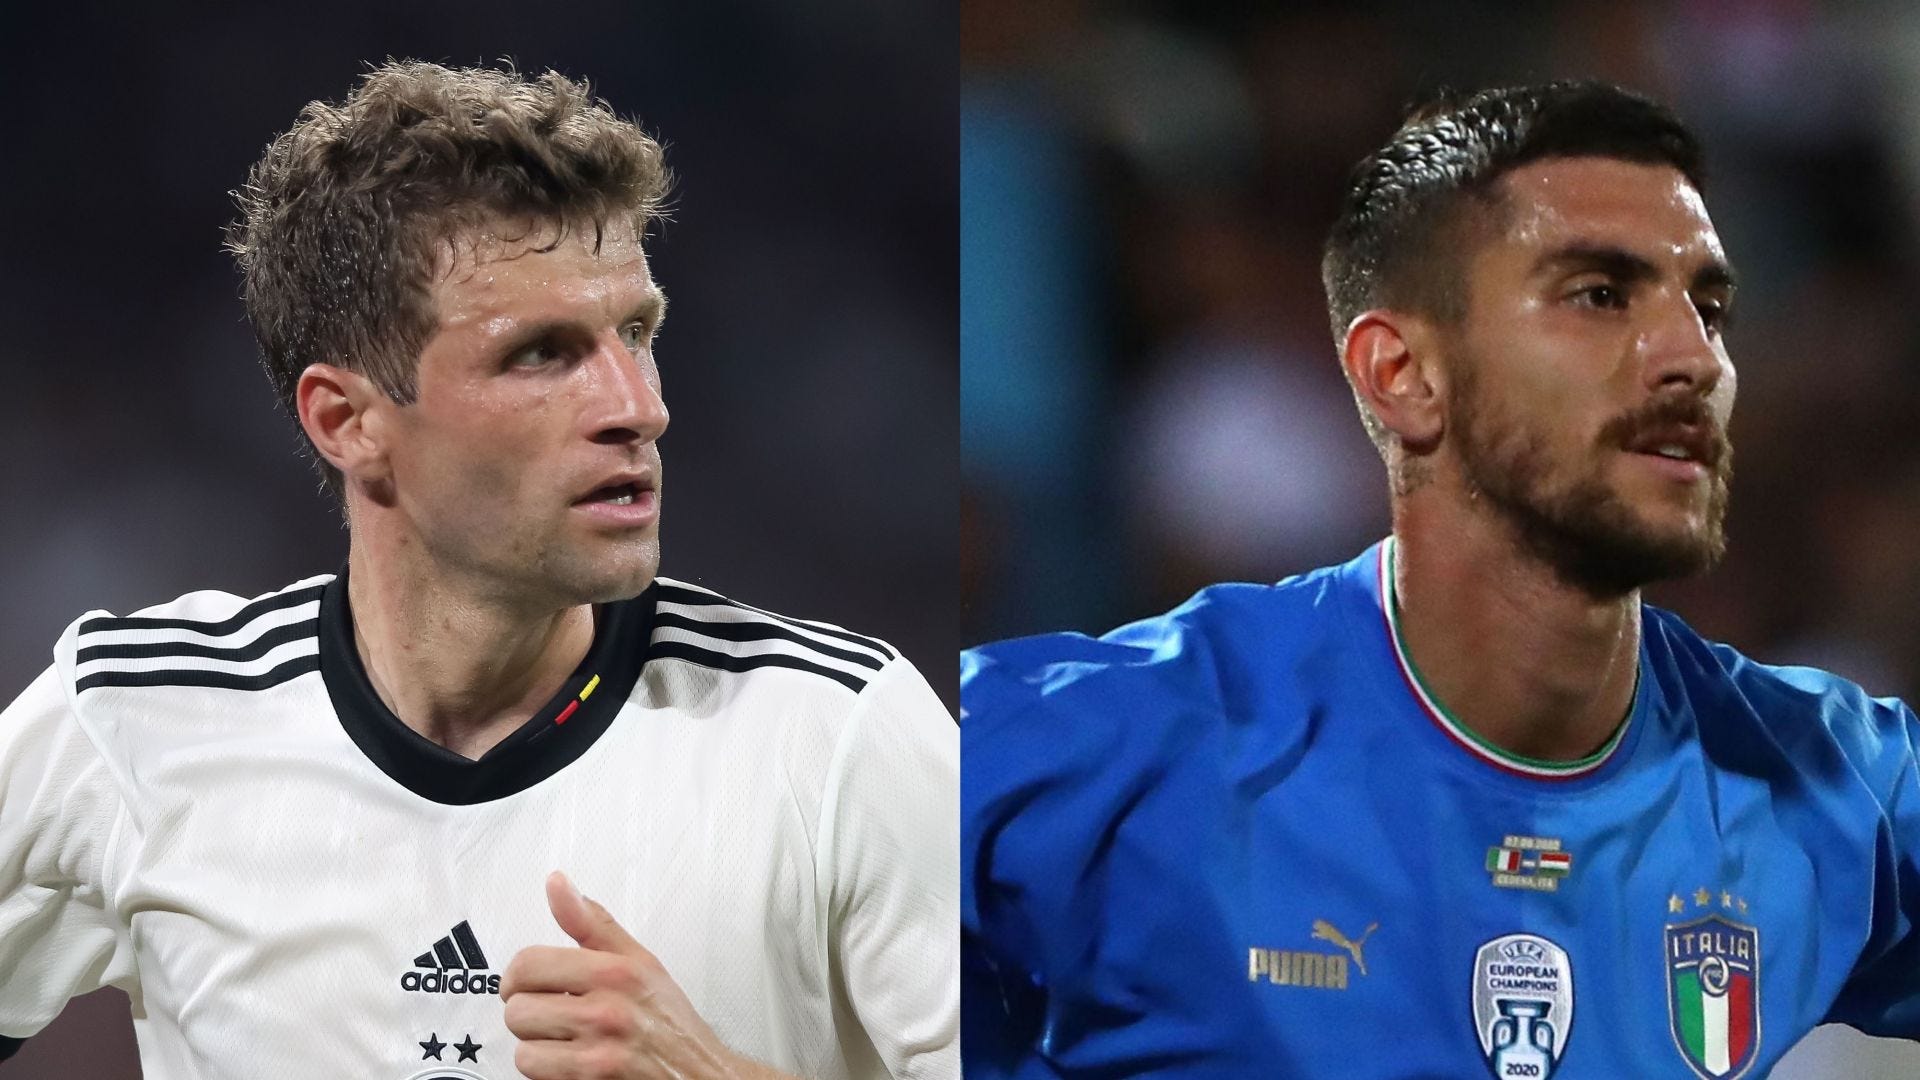 How to watch Germany vs Italy in the 2022-23 UEFA Nations League from India? Goal US